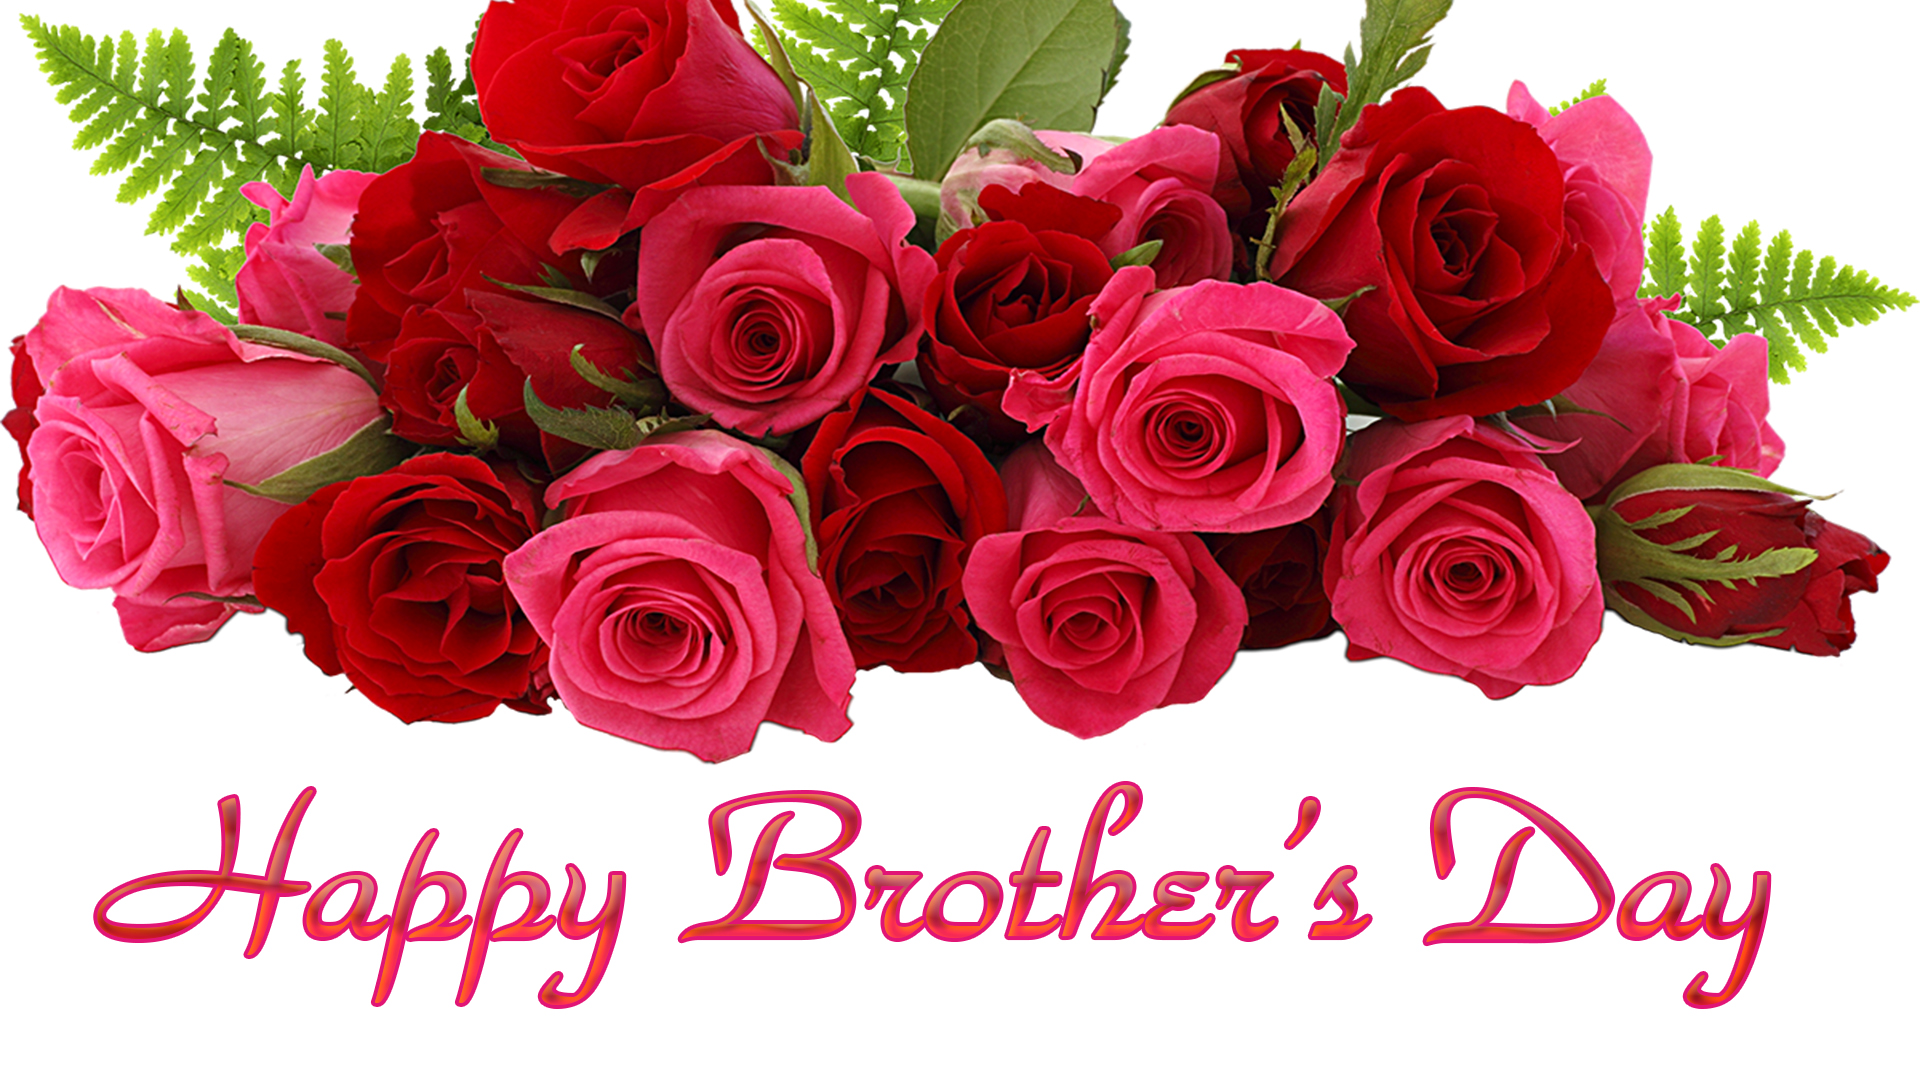 happy brothers day 2018 image